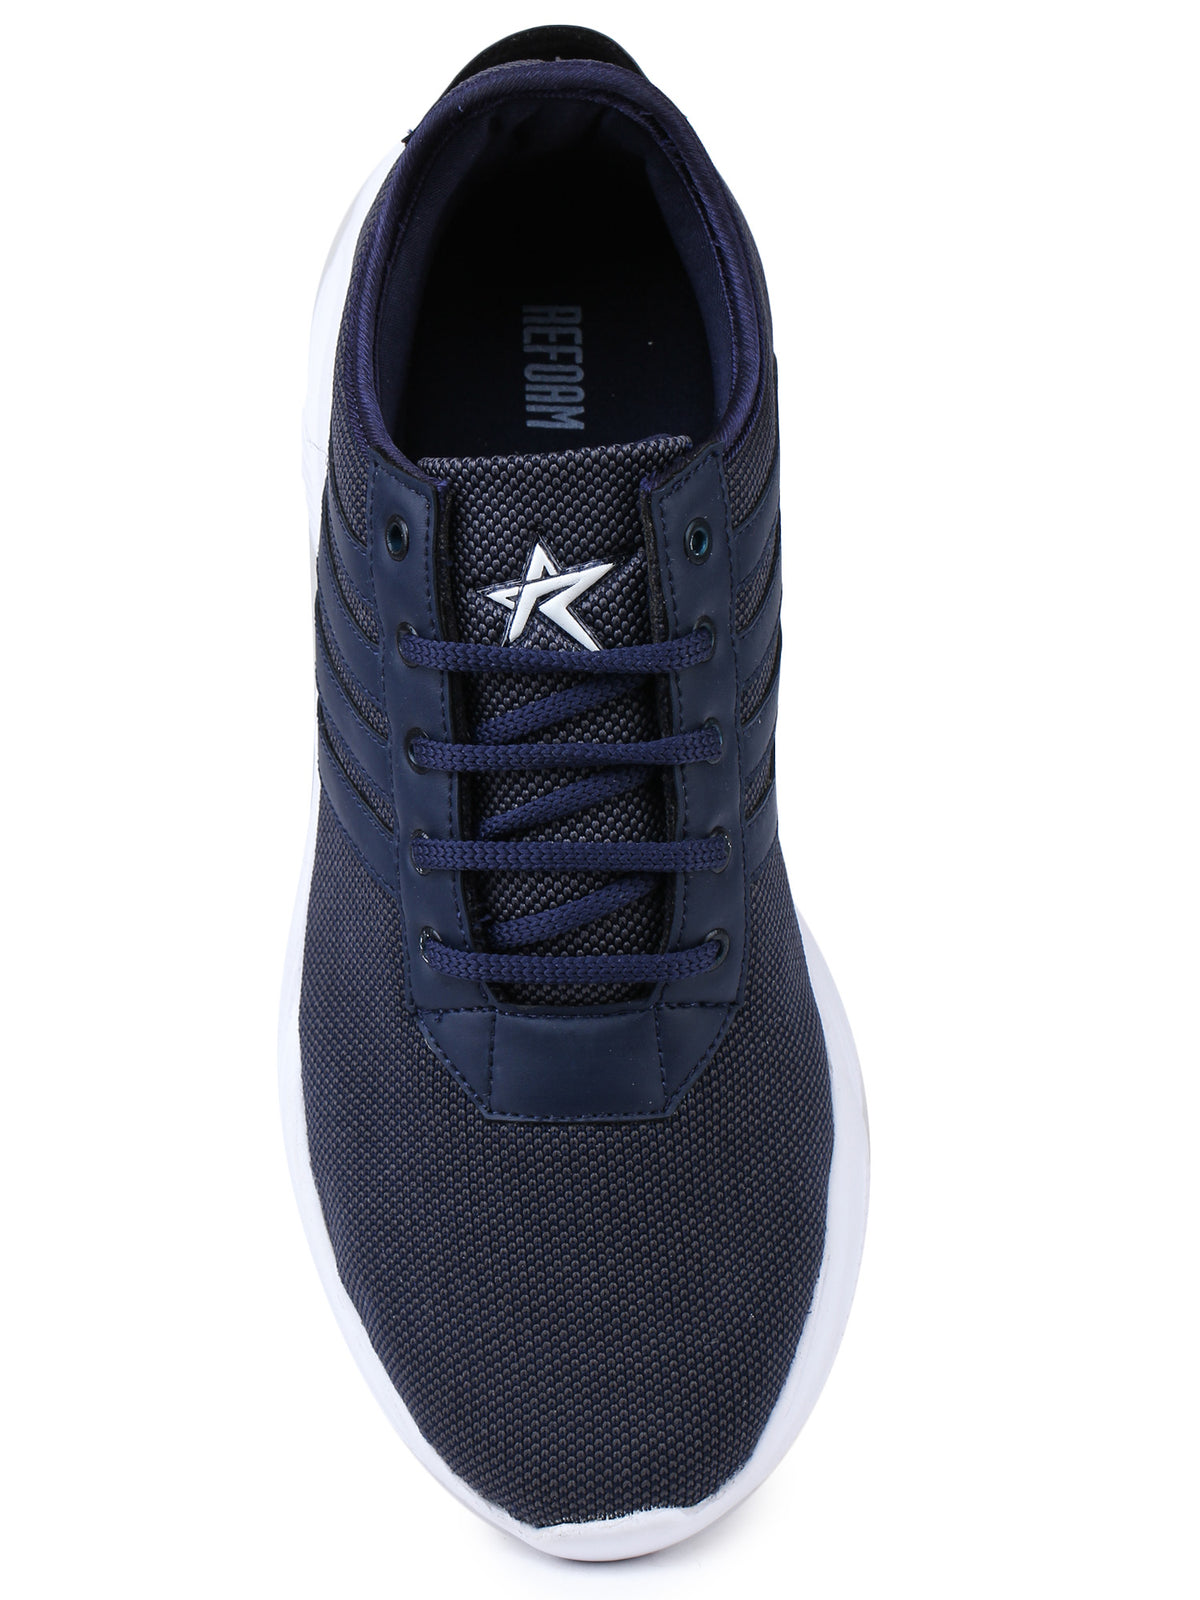 Navy Blue Solid Mesh Lace Up Lifestyle Casual Shoes For Men